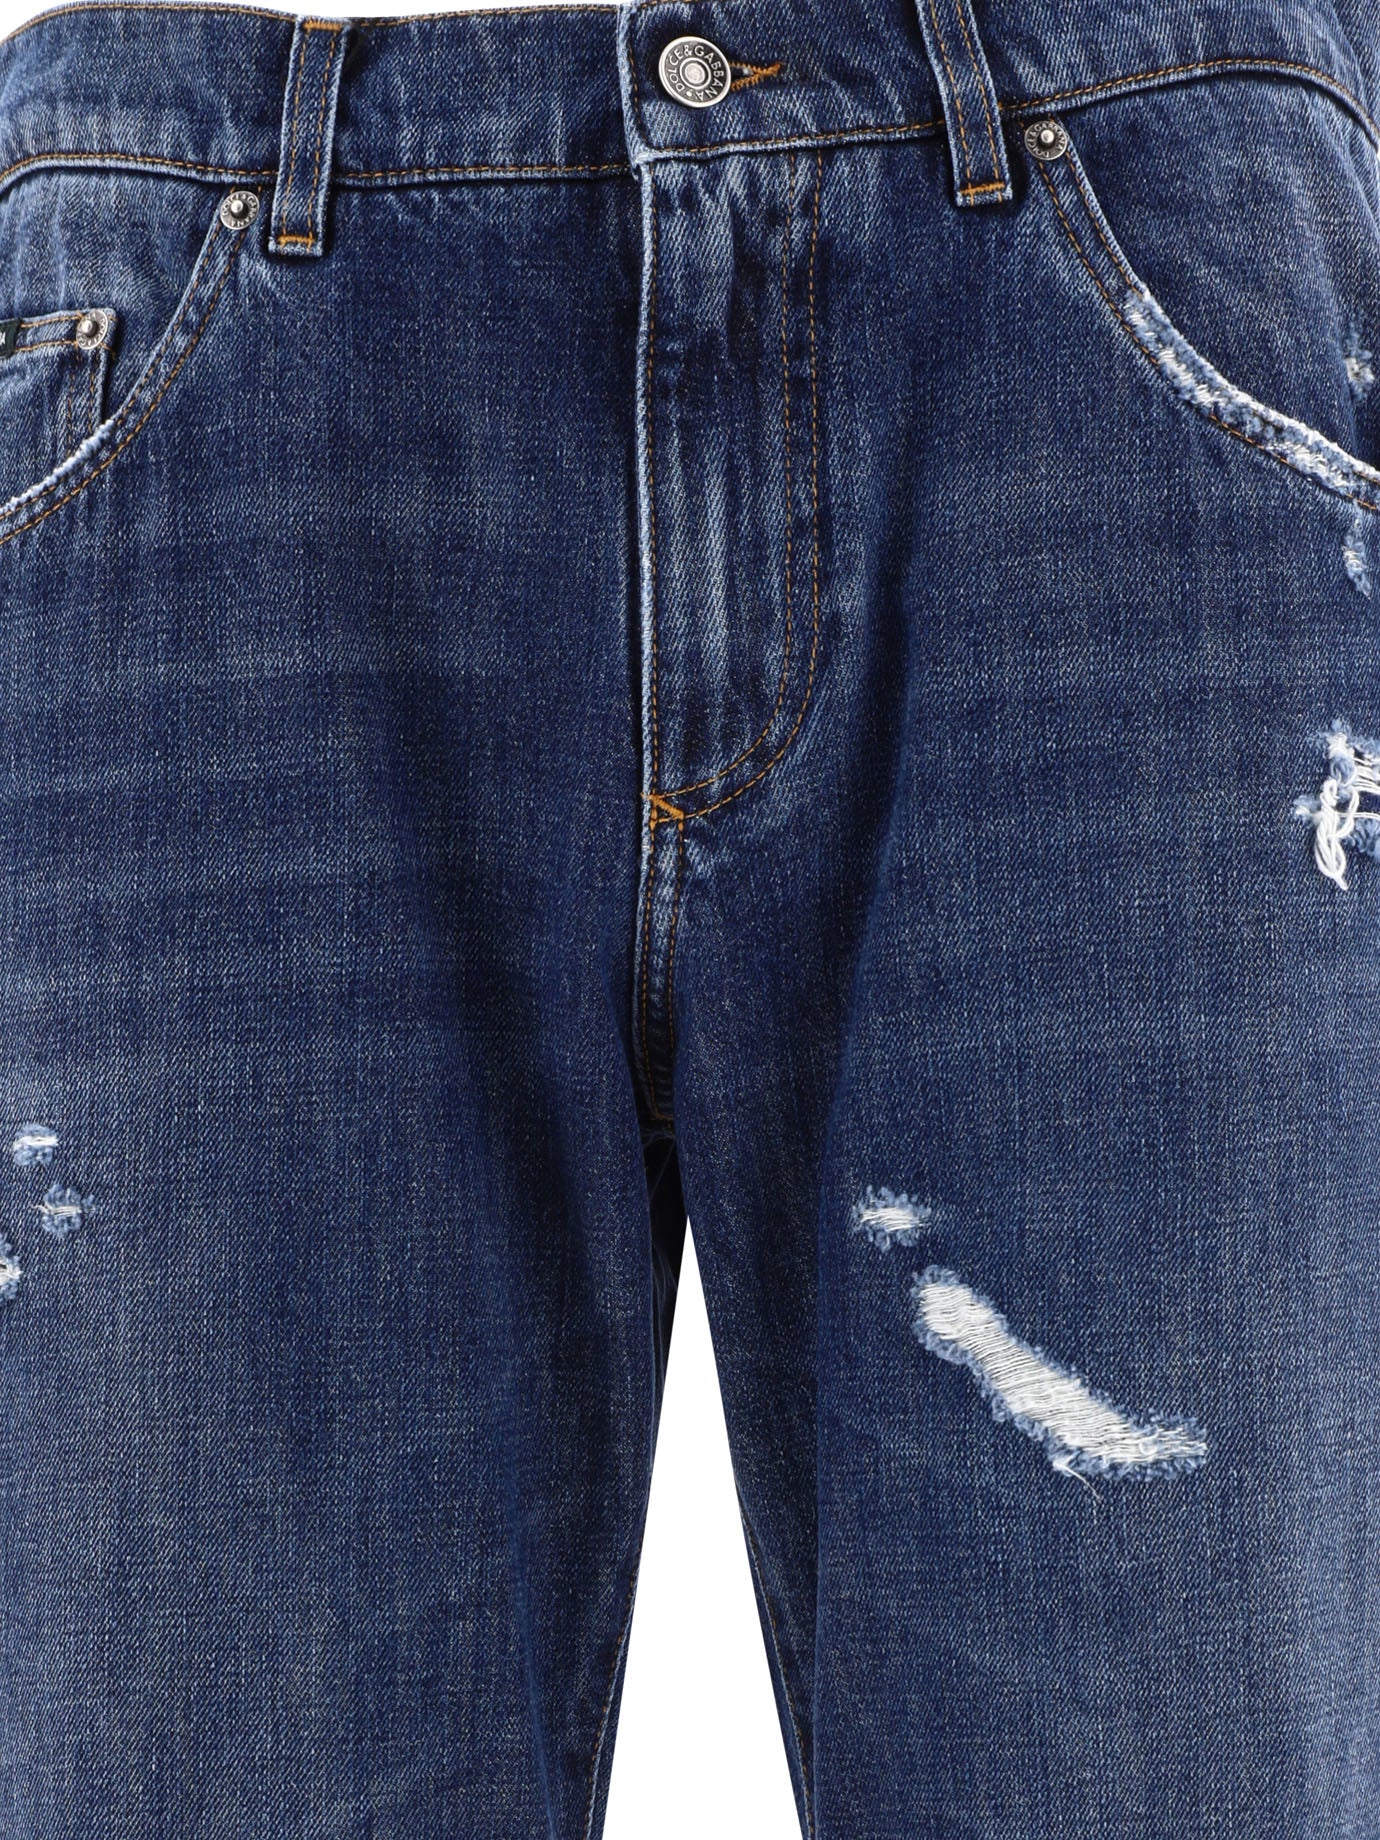 Shop Dolce & Gabbana Stylish Men's Straight Leg Jeans In Ripped Details In Blue